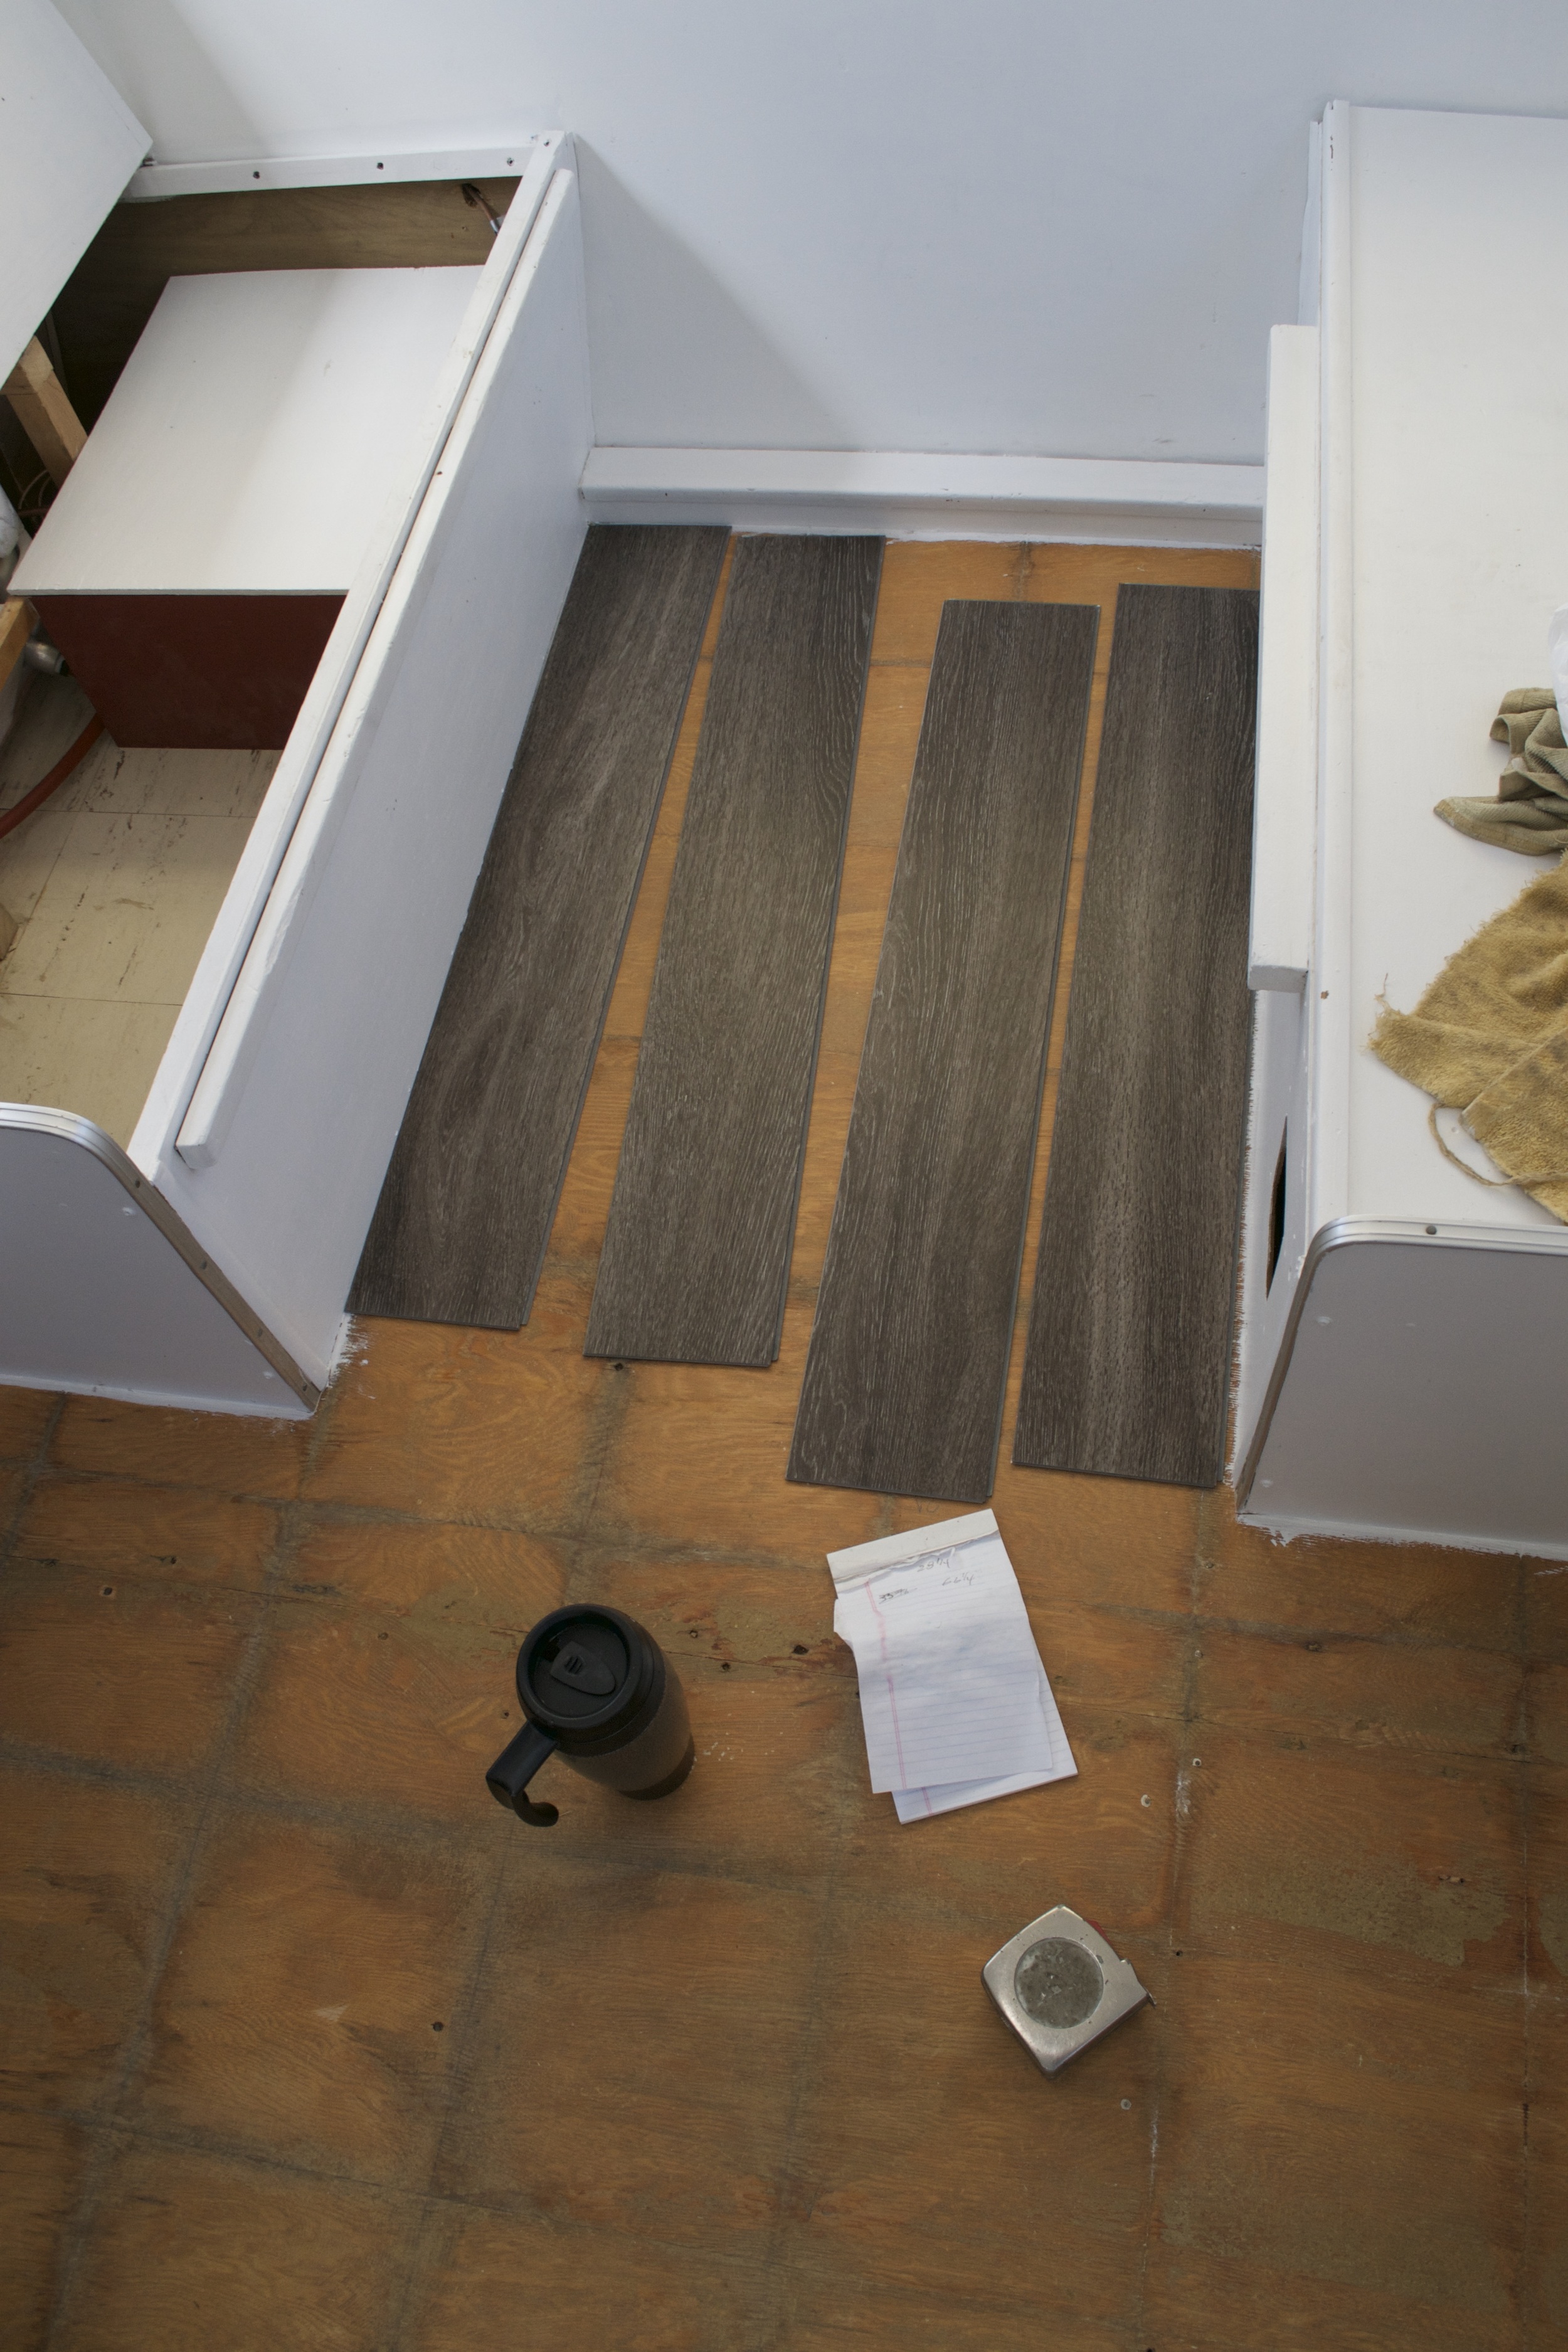 Reasons To Install Vinyl Plank Flooring In Your Trailer Or Rv